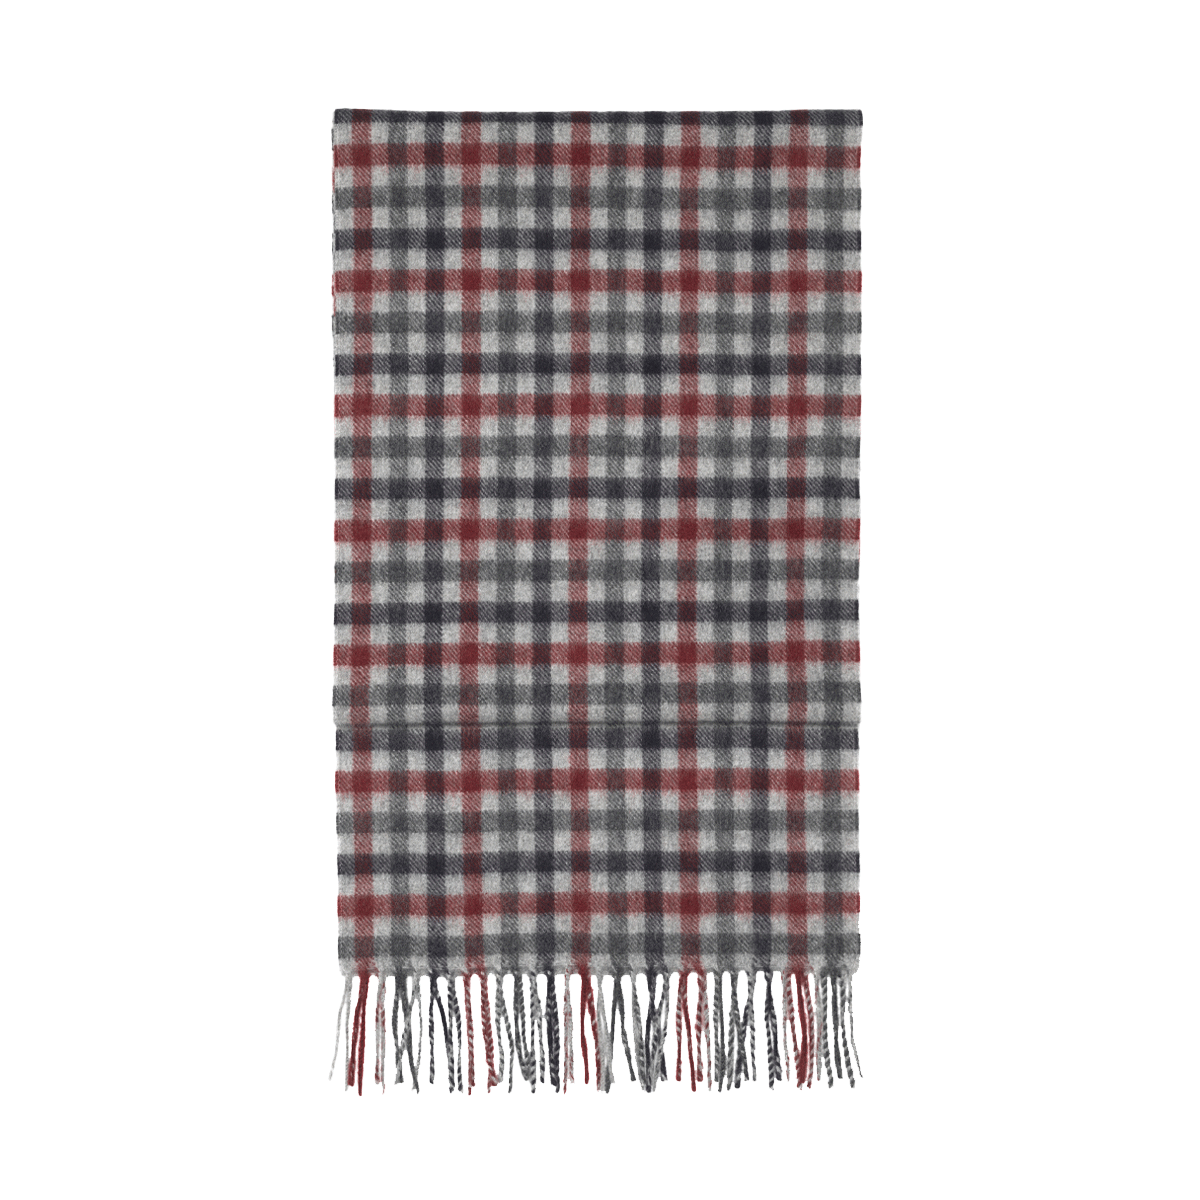 Shepherd Check Cashmere Scarf Grey/Red